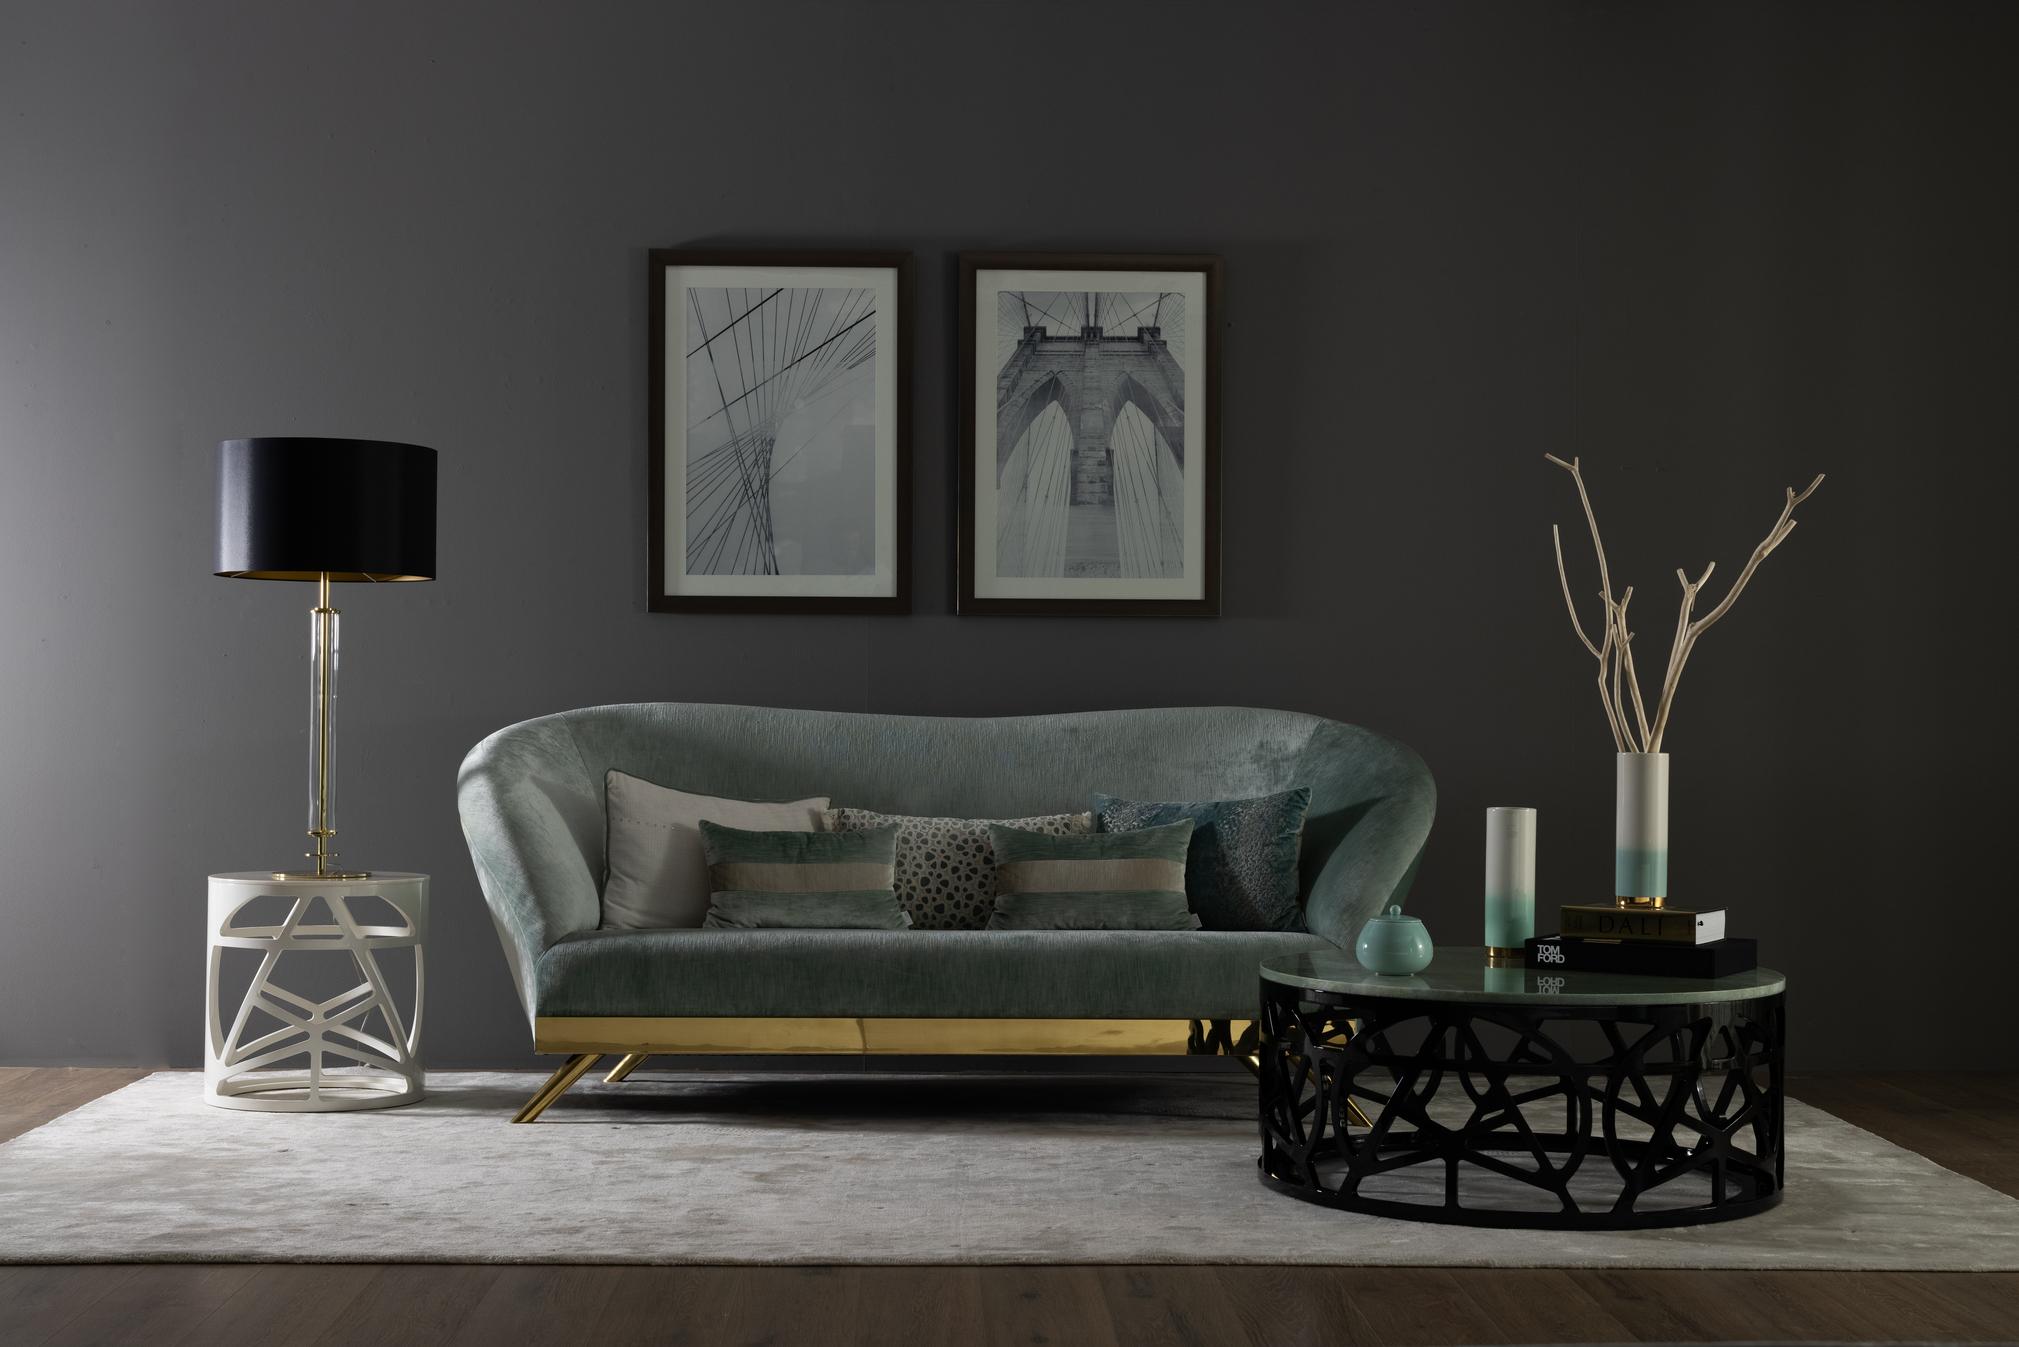 Cambridge sofa, Modern Collection, Handcrafted in Portugal - Europe by GF Modern.

With an elegant design inspired by the eternal surroundings of bohemian life, Cambridge exudes a stylish yet serene feel. The polished brass legs and structure